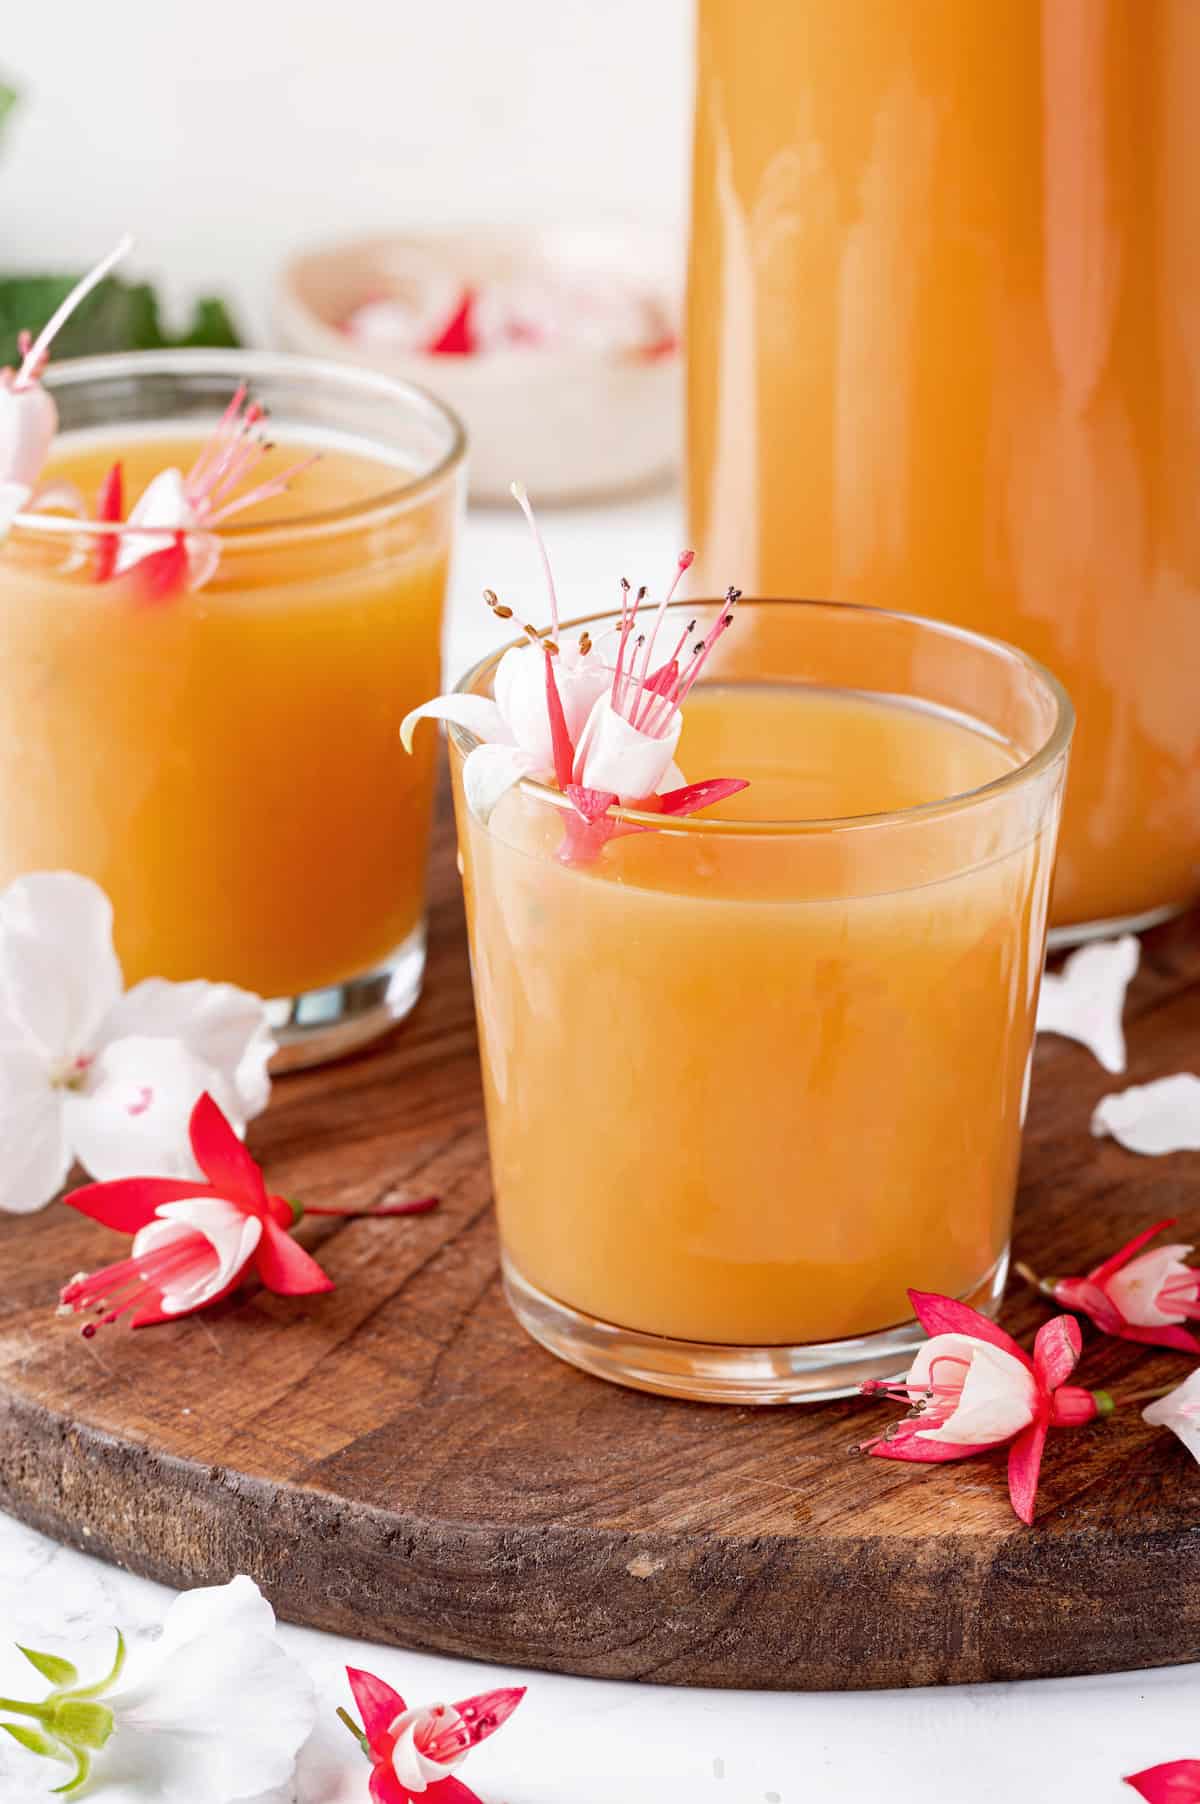 Two juice glasses of POG juice with tropical flowers for garnish